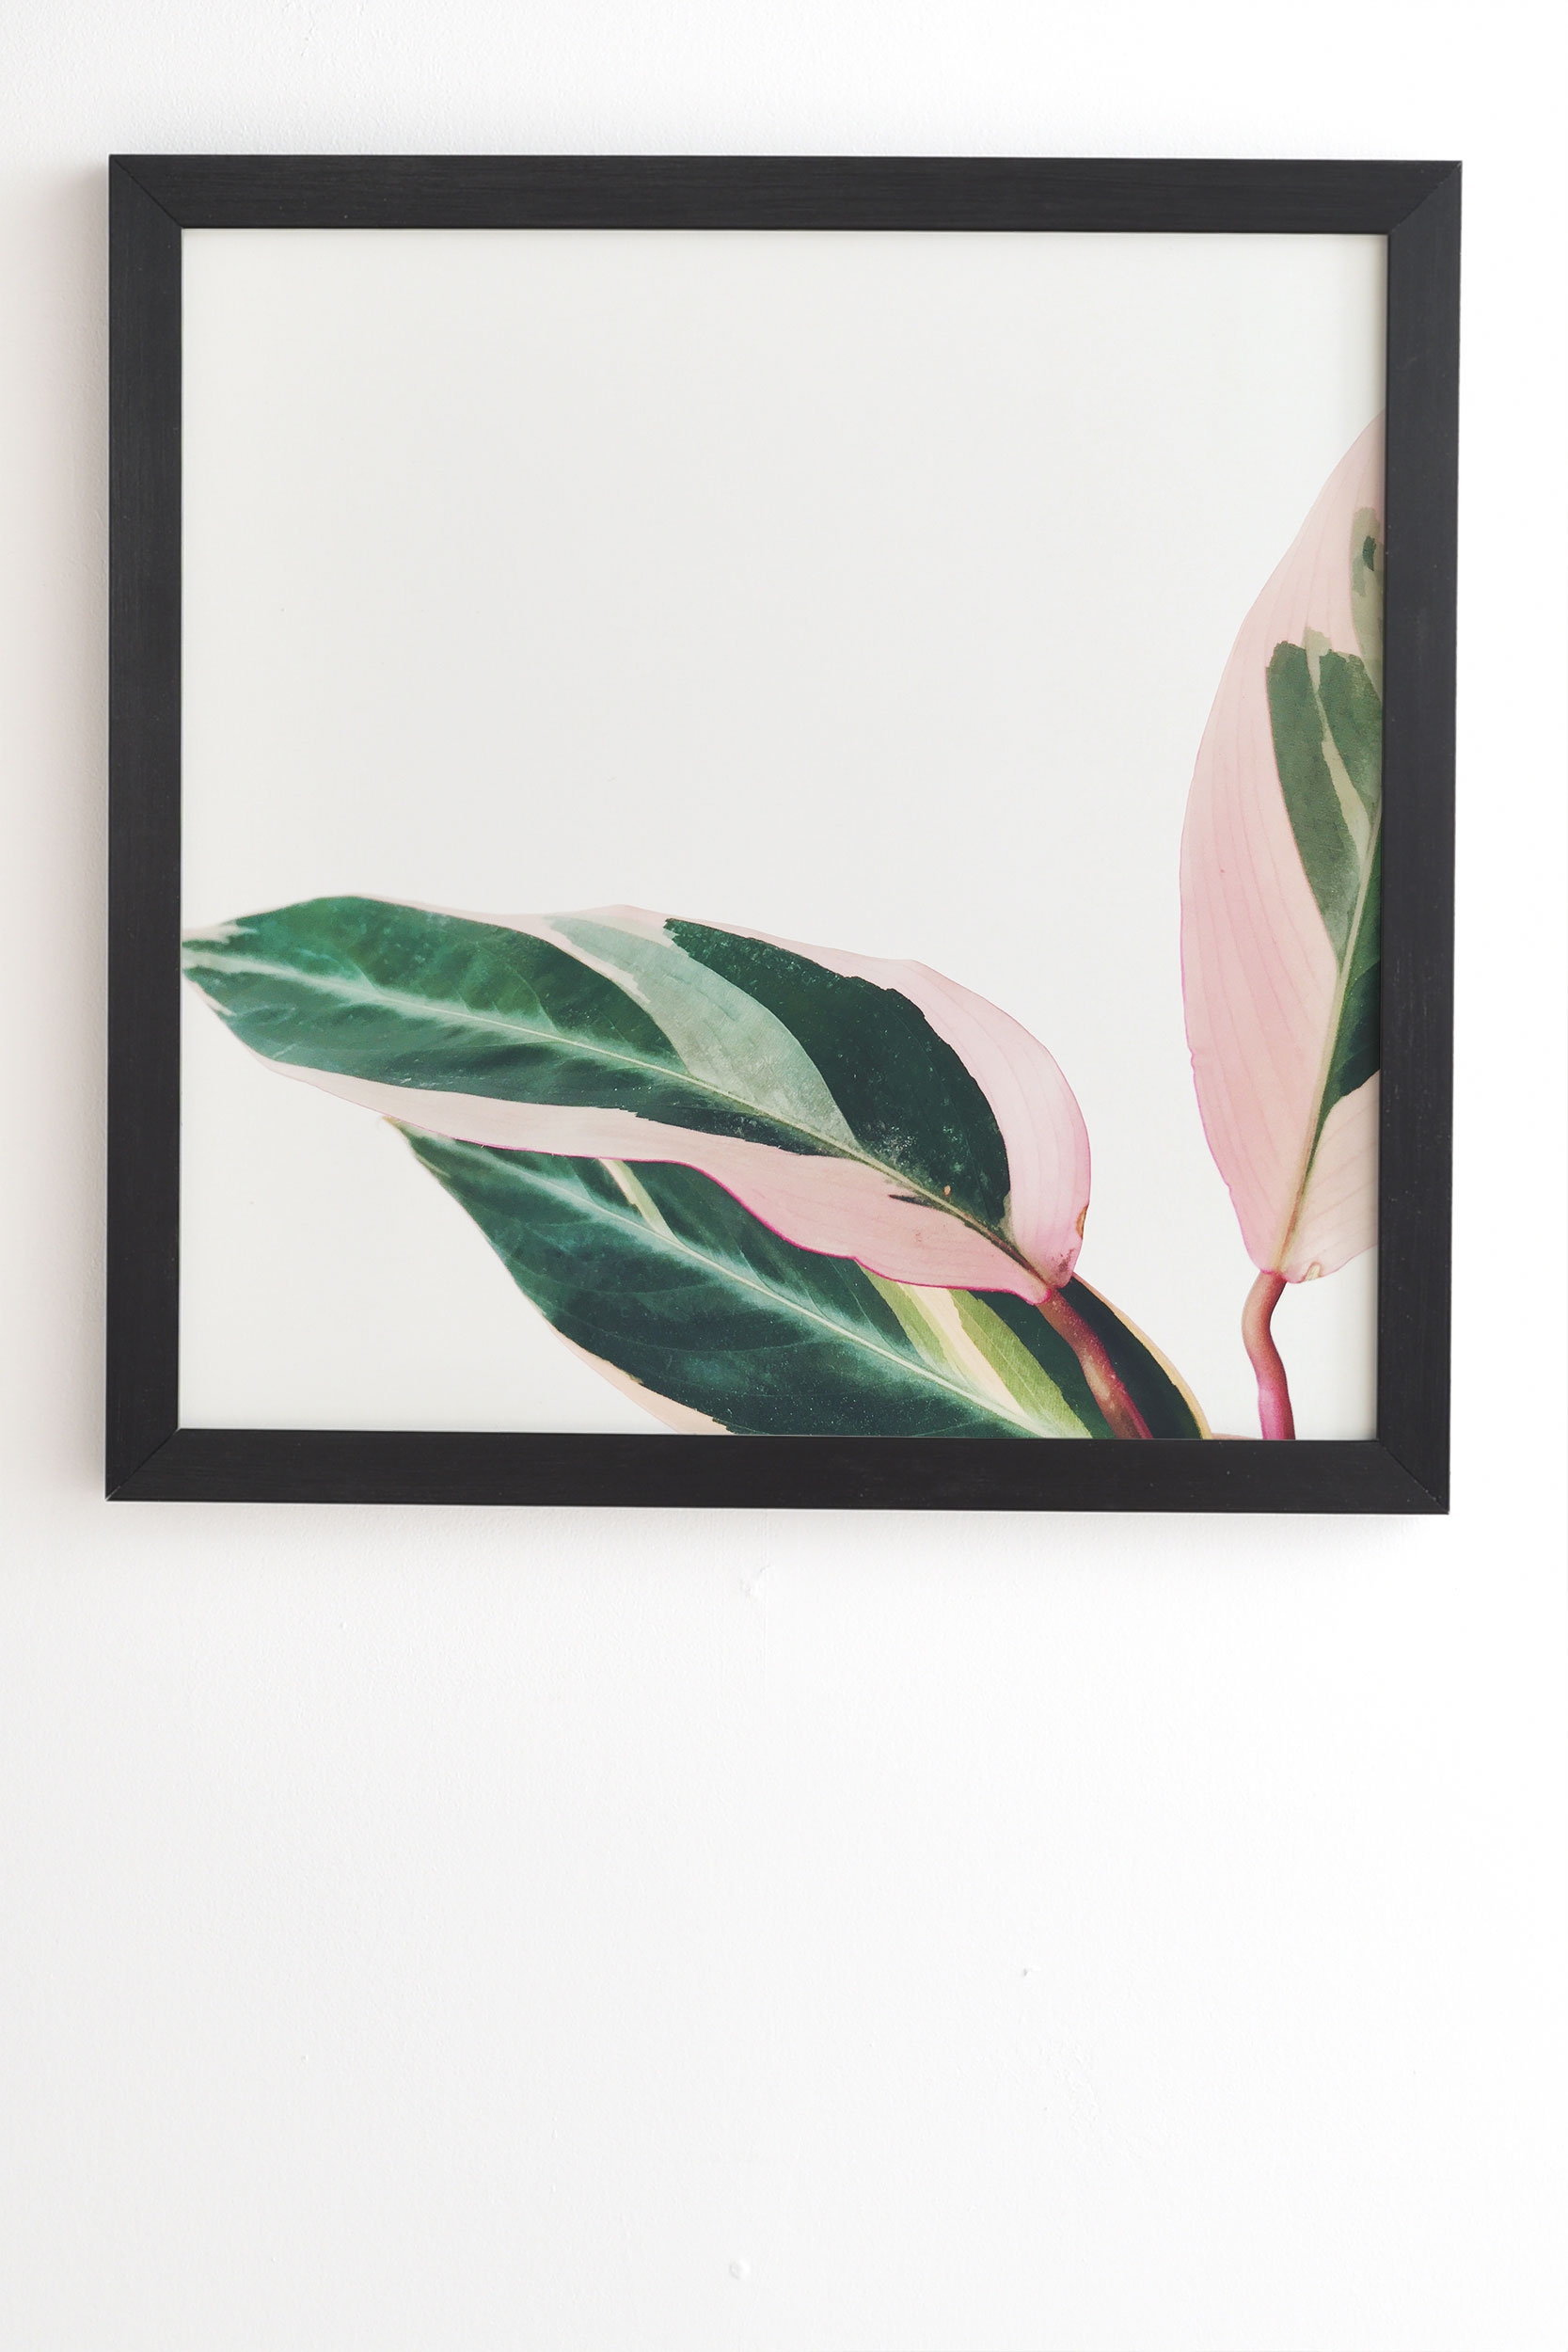 Pink Leaves Ii by Cassia Beck - Framed Wall Art Basic Black 20" x 20" - Image 1